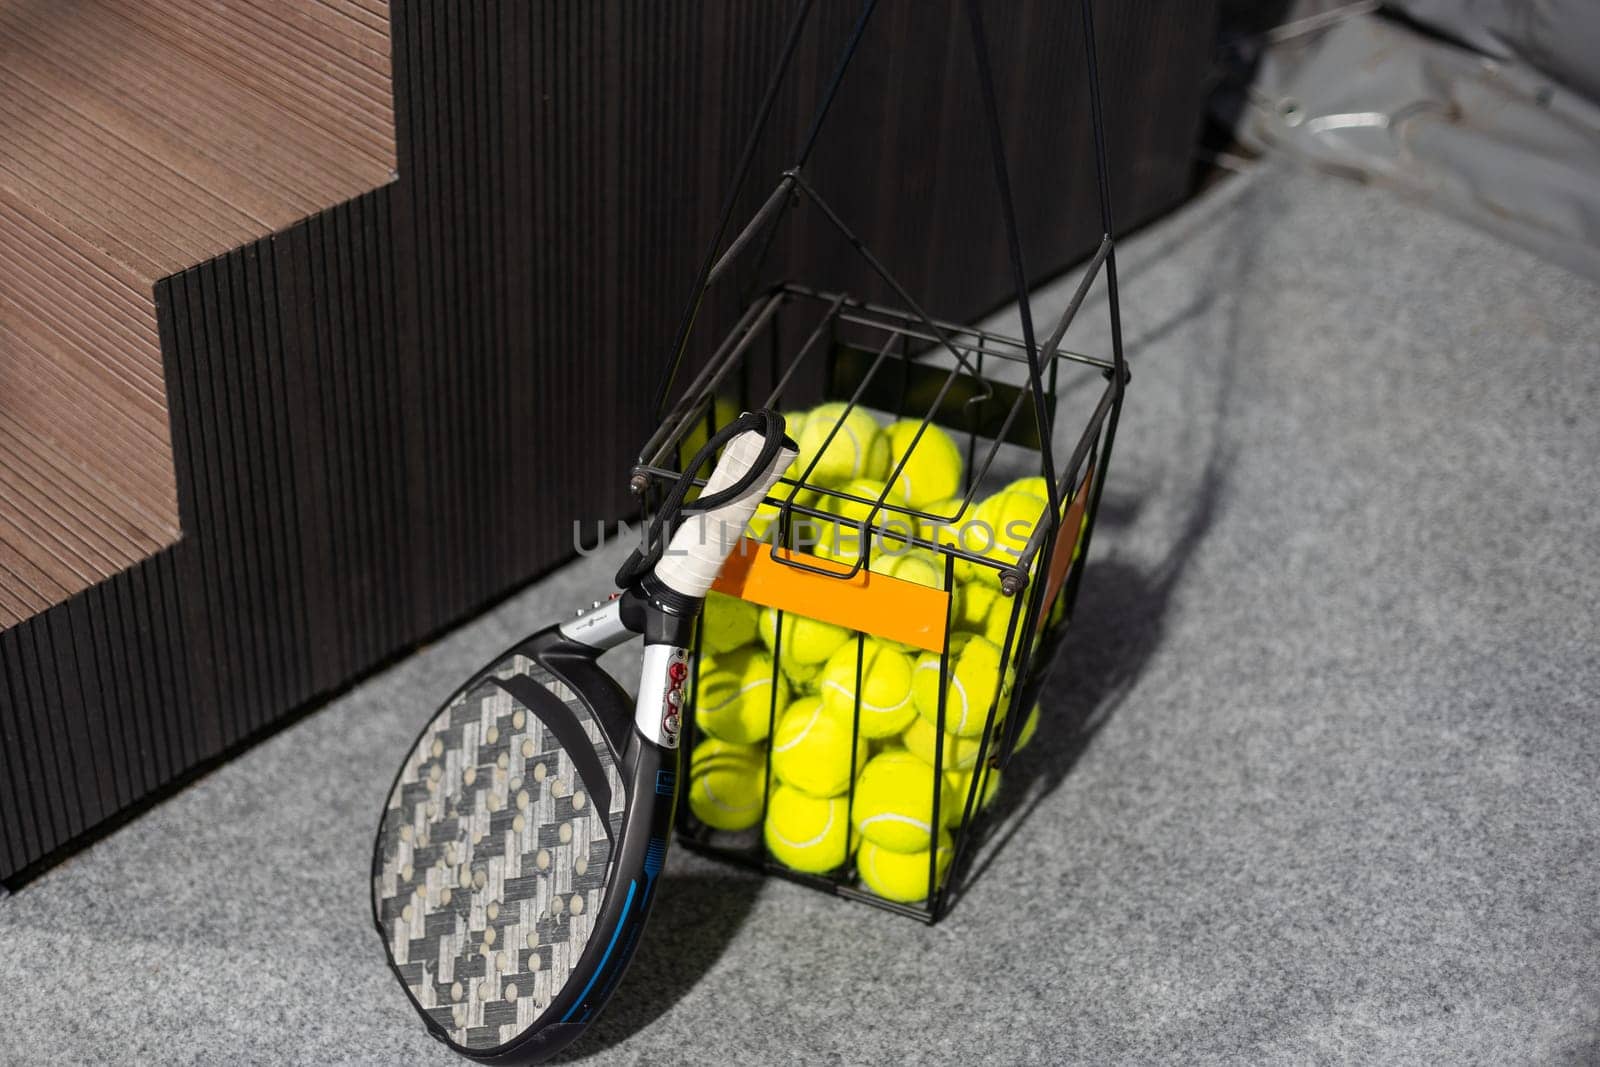 paddle tennis objects in court, racket and balls. High quality photo